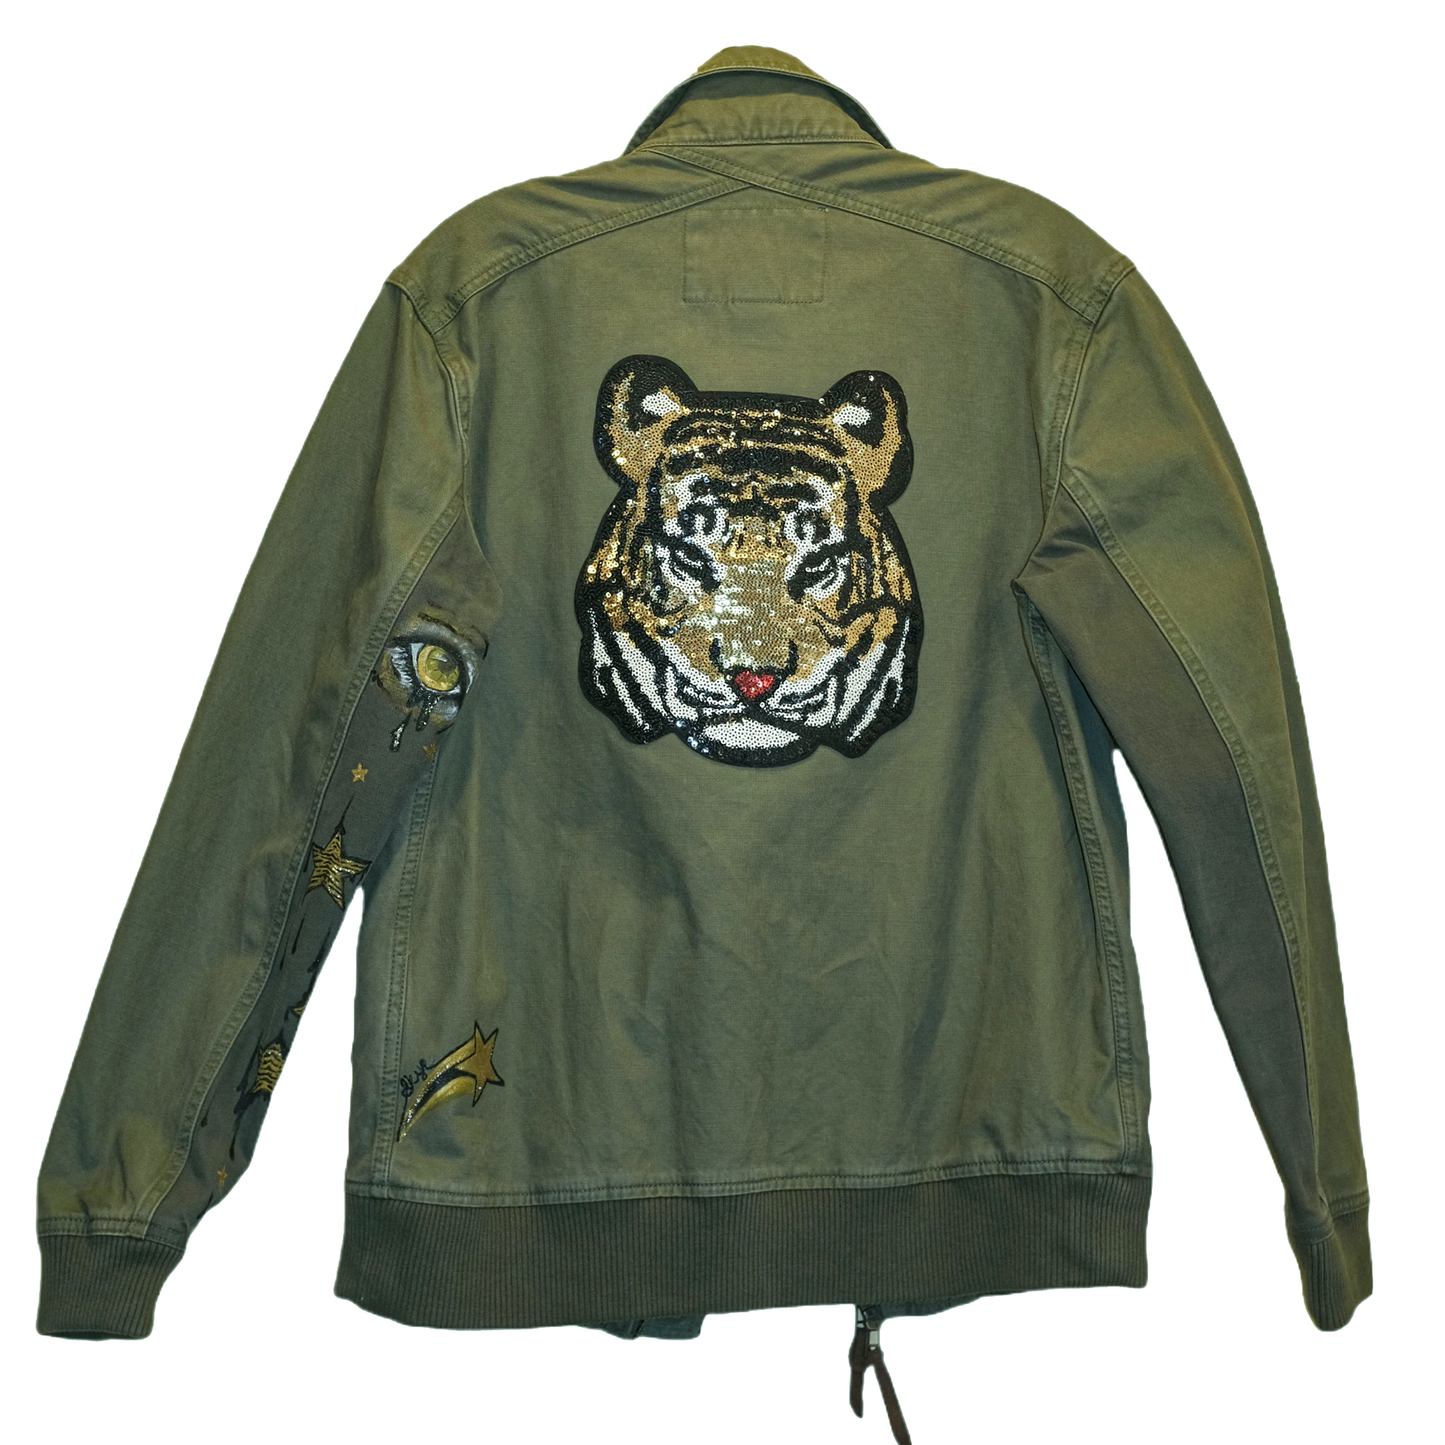 Sequin Tiger - Up-cycled Koto Army Green Jacket - Hand Painted and Stitched by Skye De La Rosa